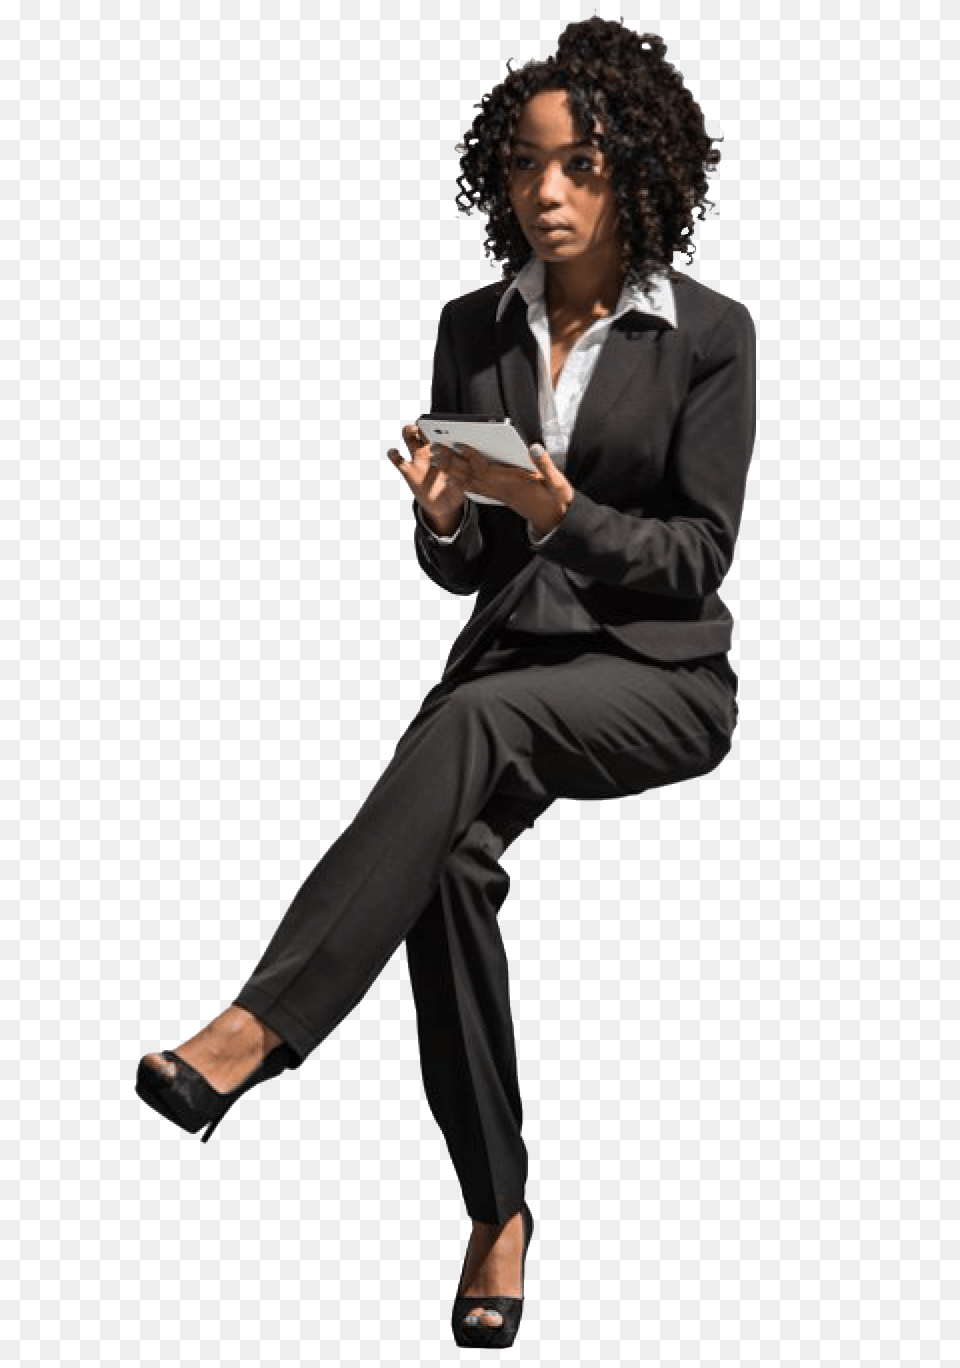 Download Hd Cutout Woman Sitting People Business People Sitting, Person, Suit, Jacket, Formal Wear Png